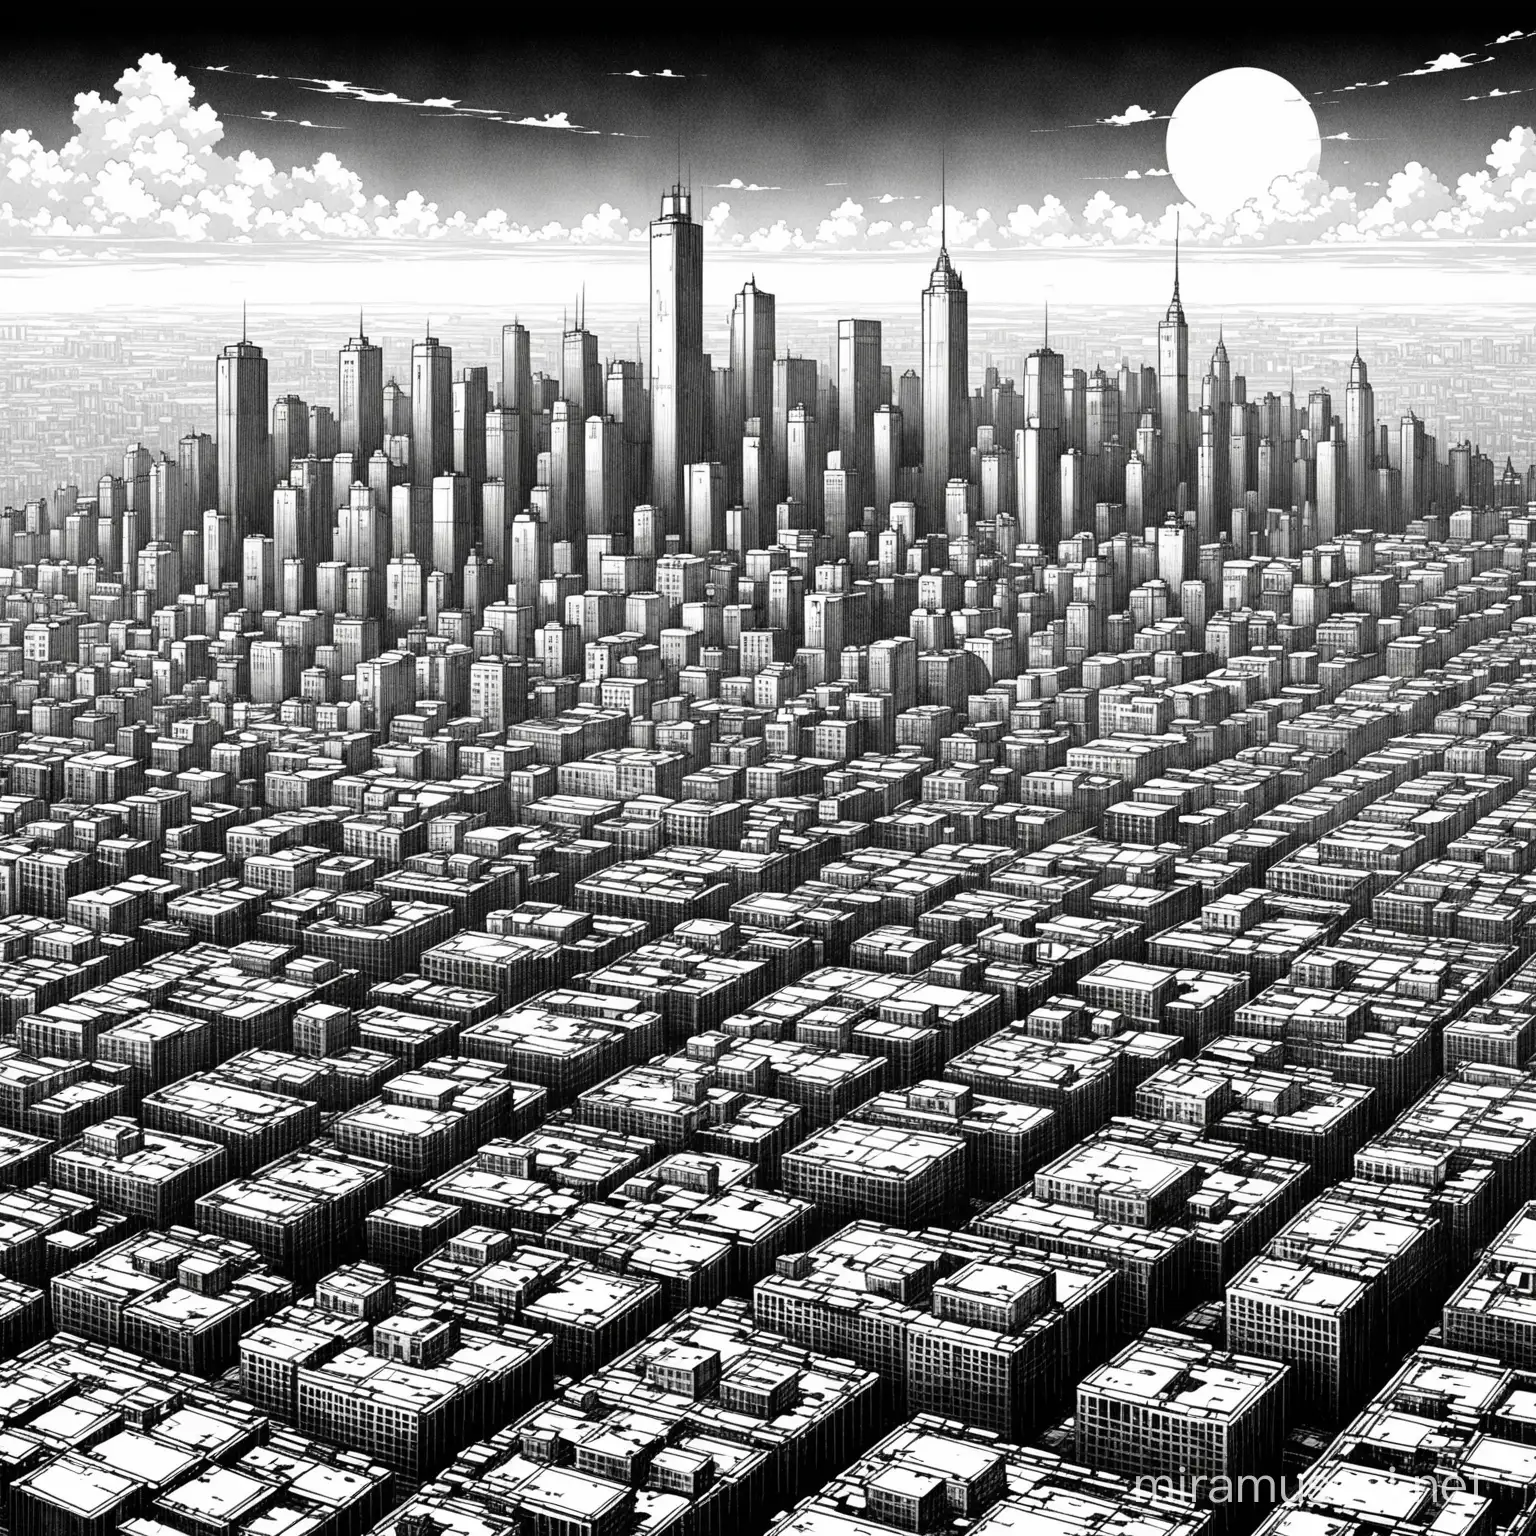 A black and white illustration of a sterile city skyline. Buildings are identical and lack any color or architectural variety.